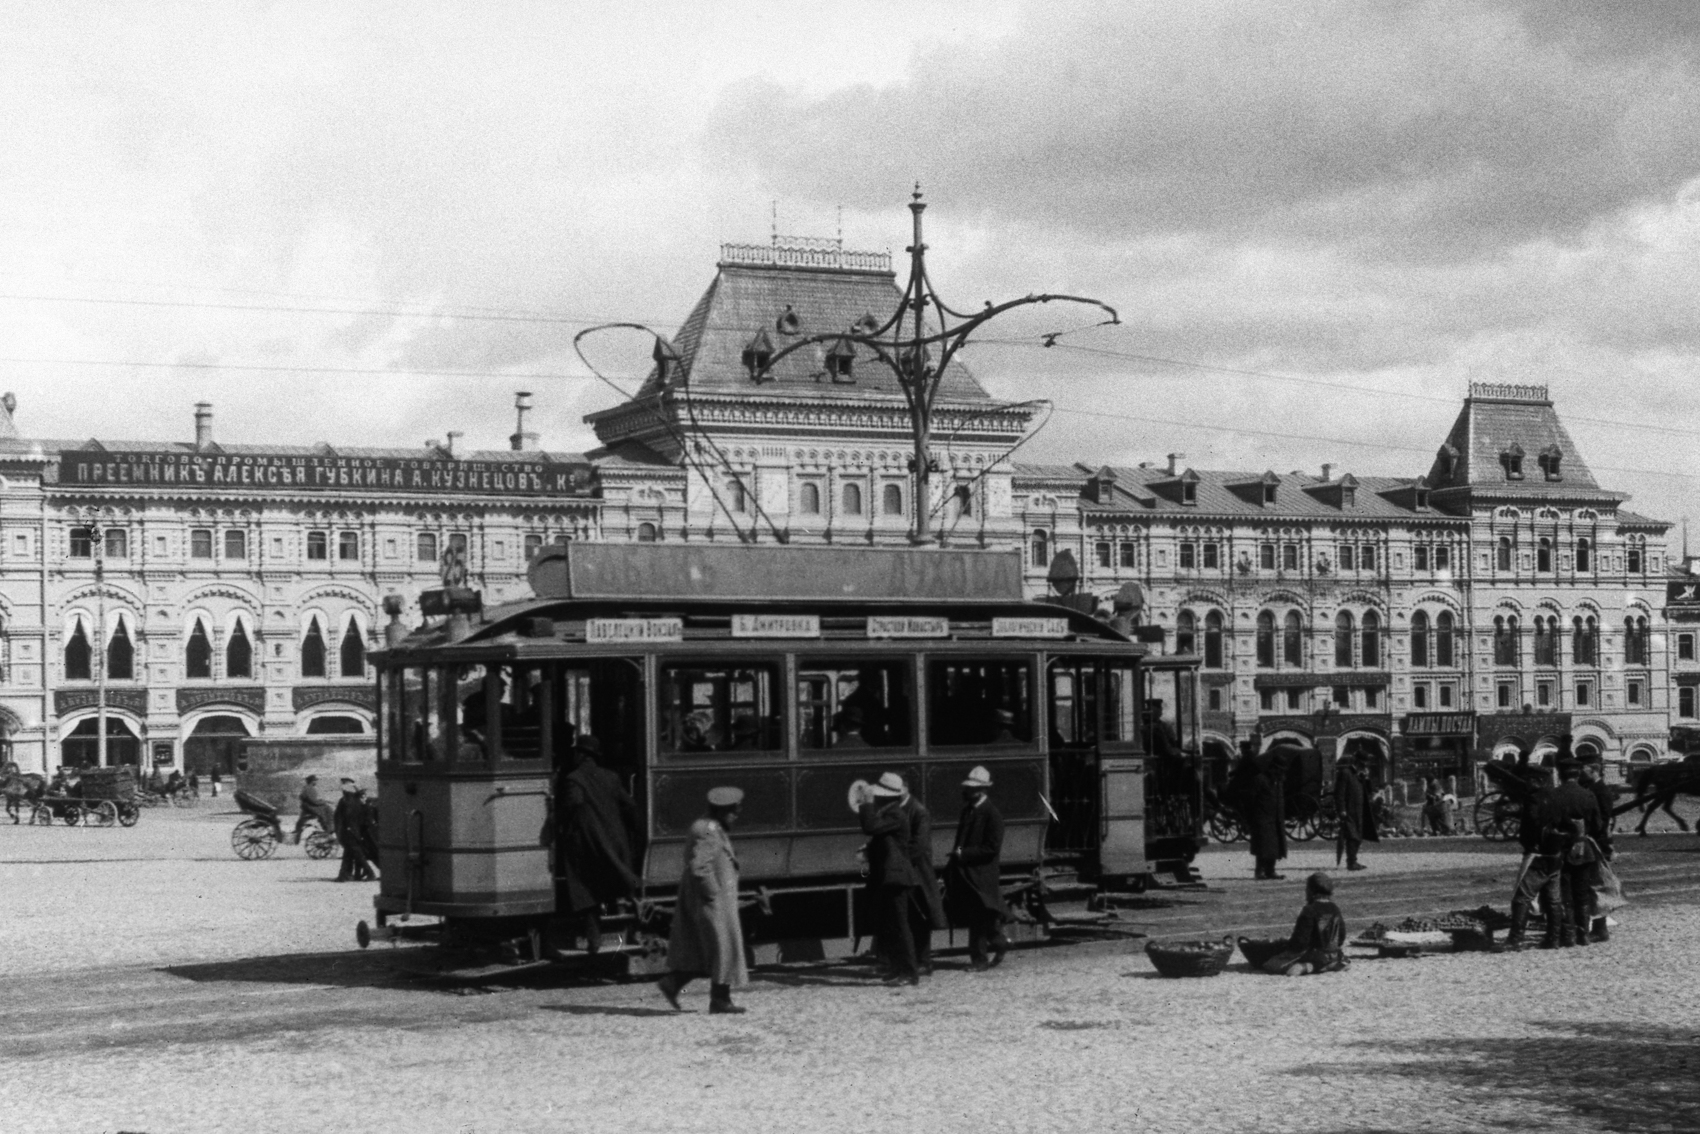 Moscow, Ganz 2-axle motor car № 68; Moscow — Historical photos — Electric tramway (1898-1920)